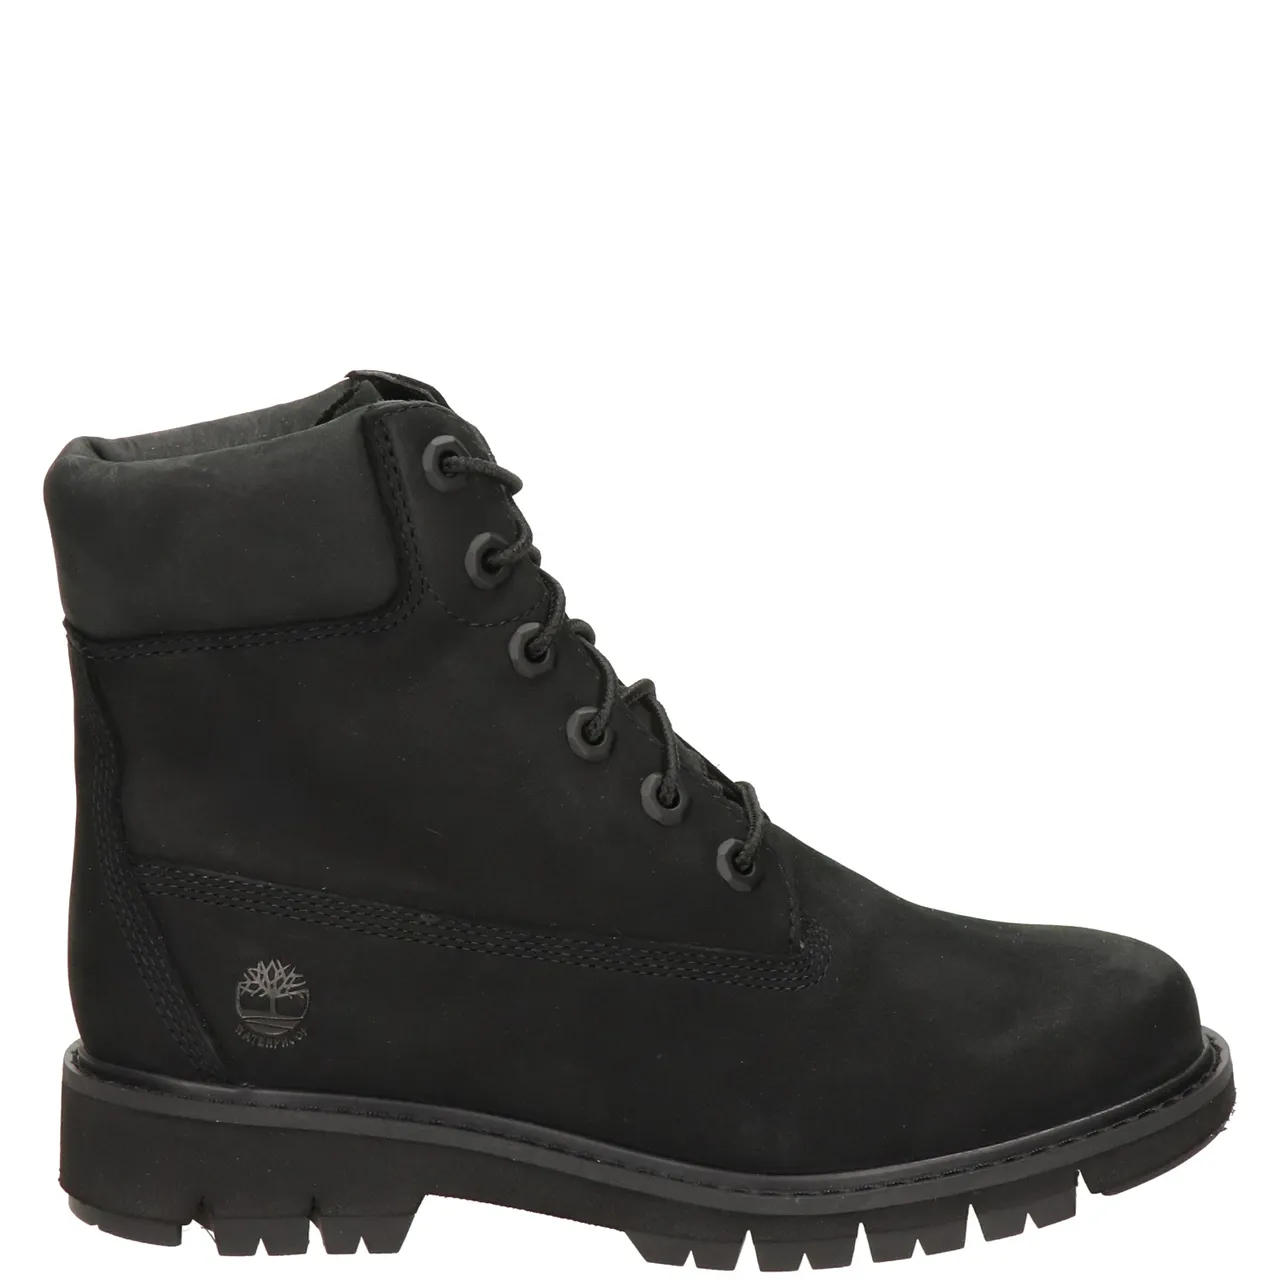 Timberland Lucia Way veterboots